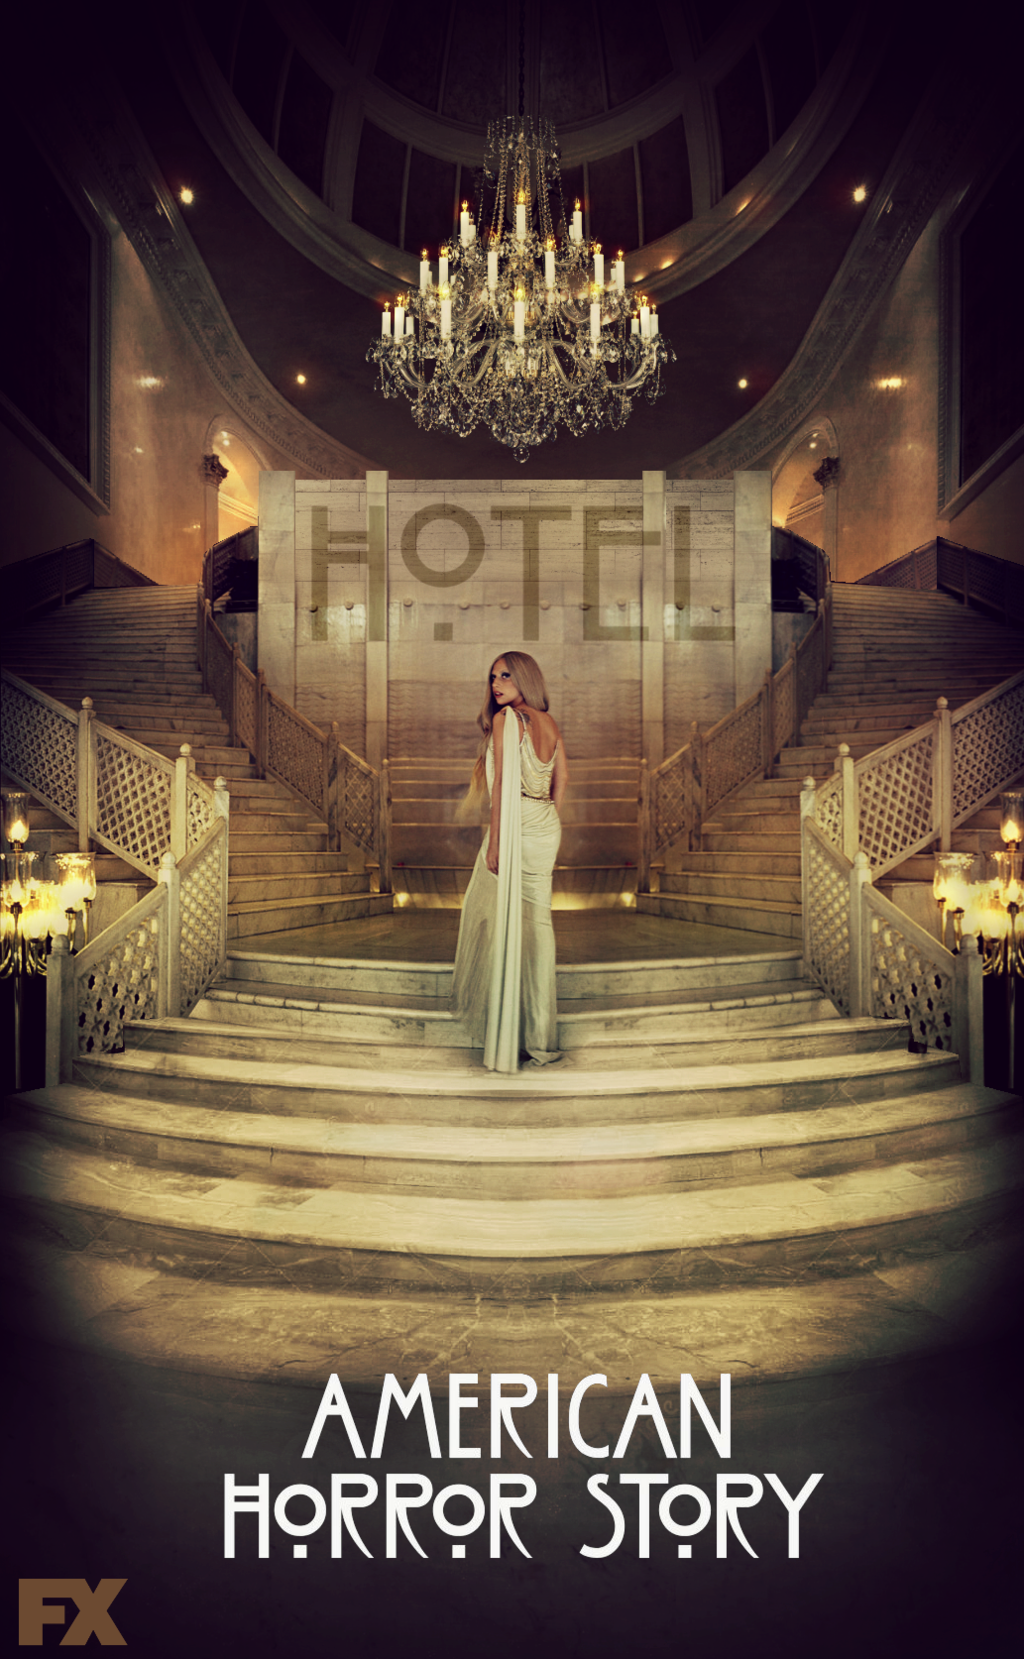 American Horror Story Hotel Lady Gaga By Panchecco